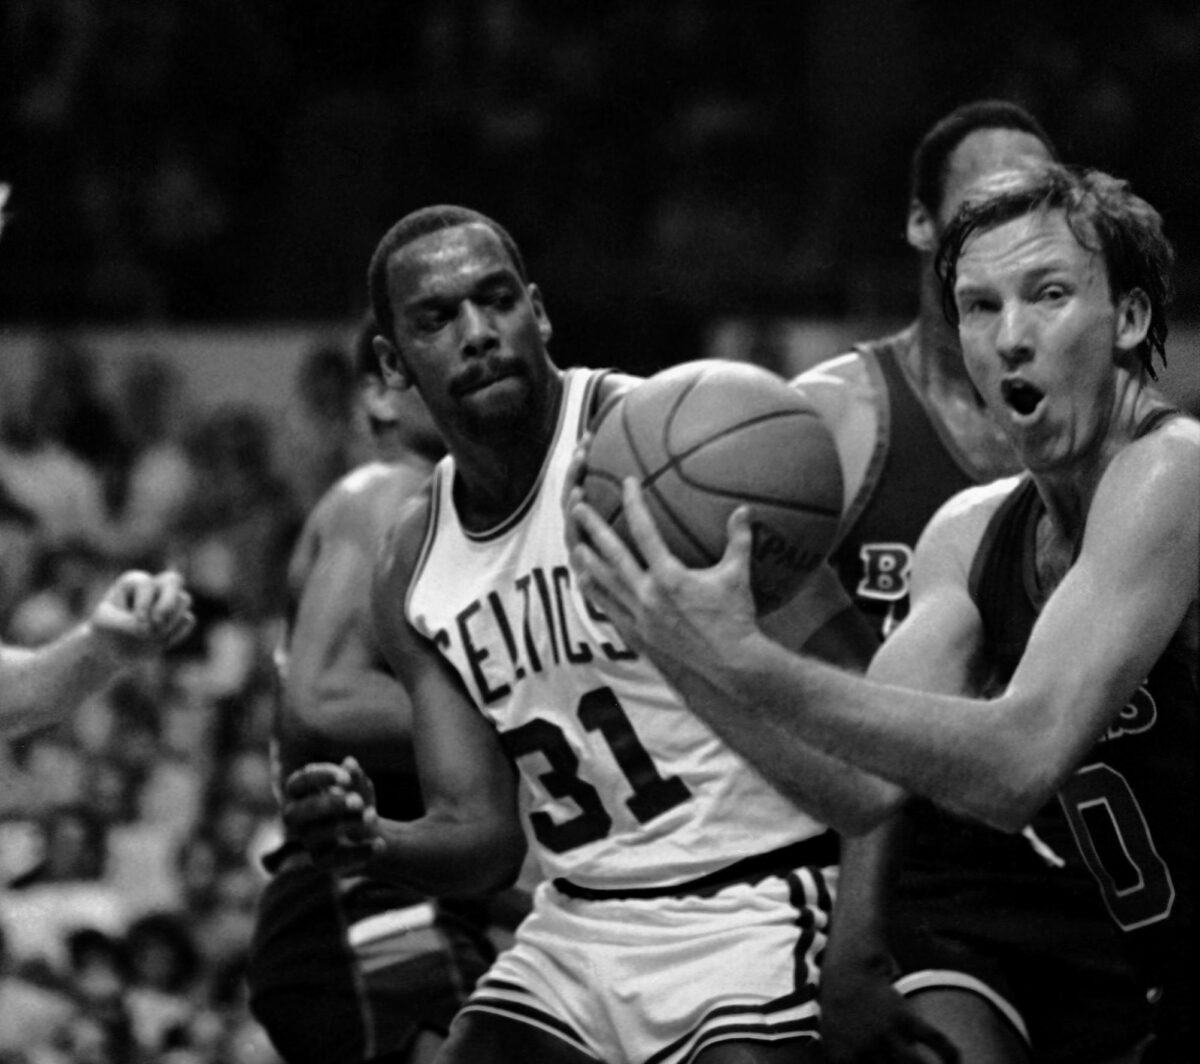 Celtics champ, broadcaster Cedric Maxwell counters Dr. J’s all-time great list with his own